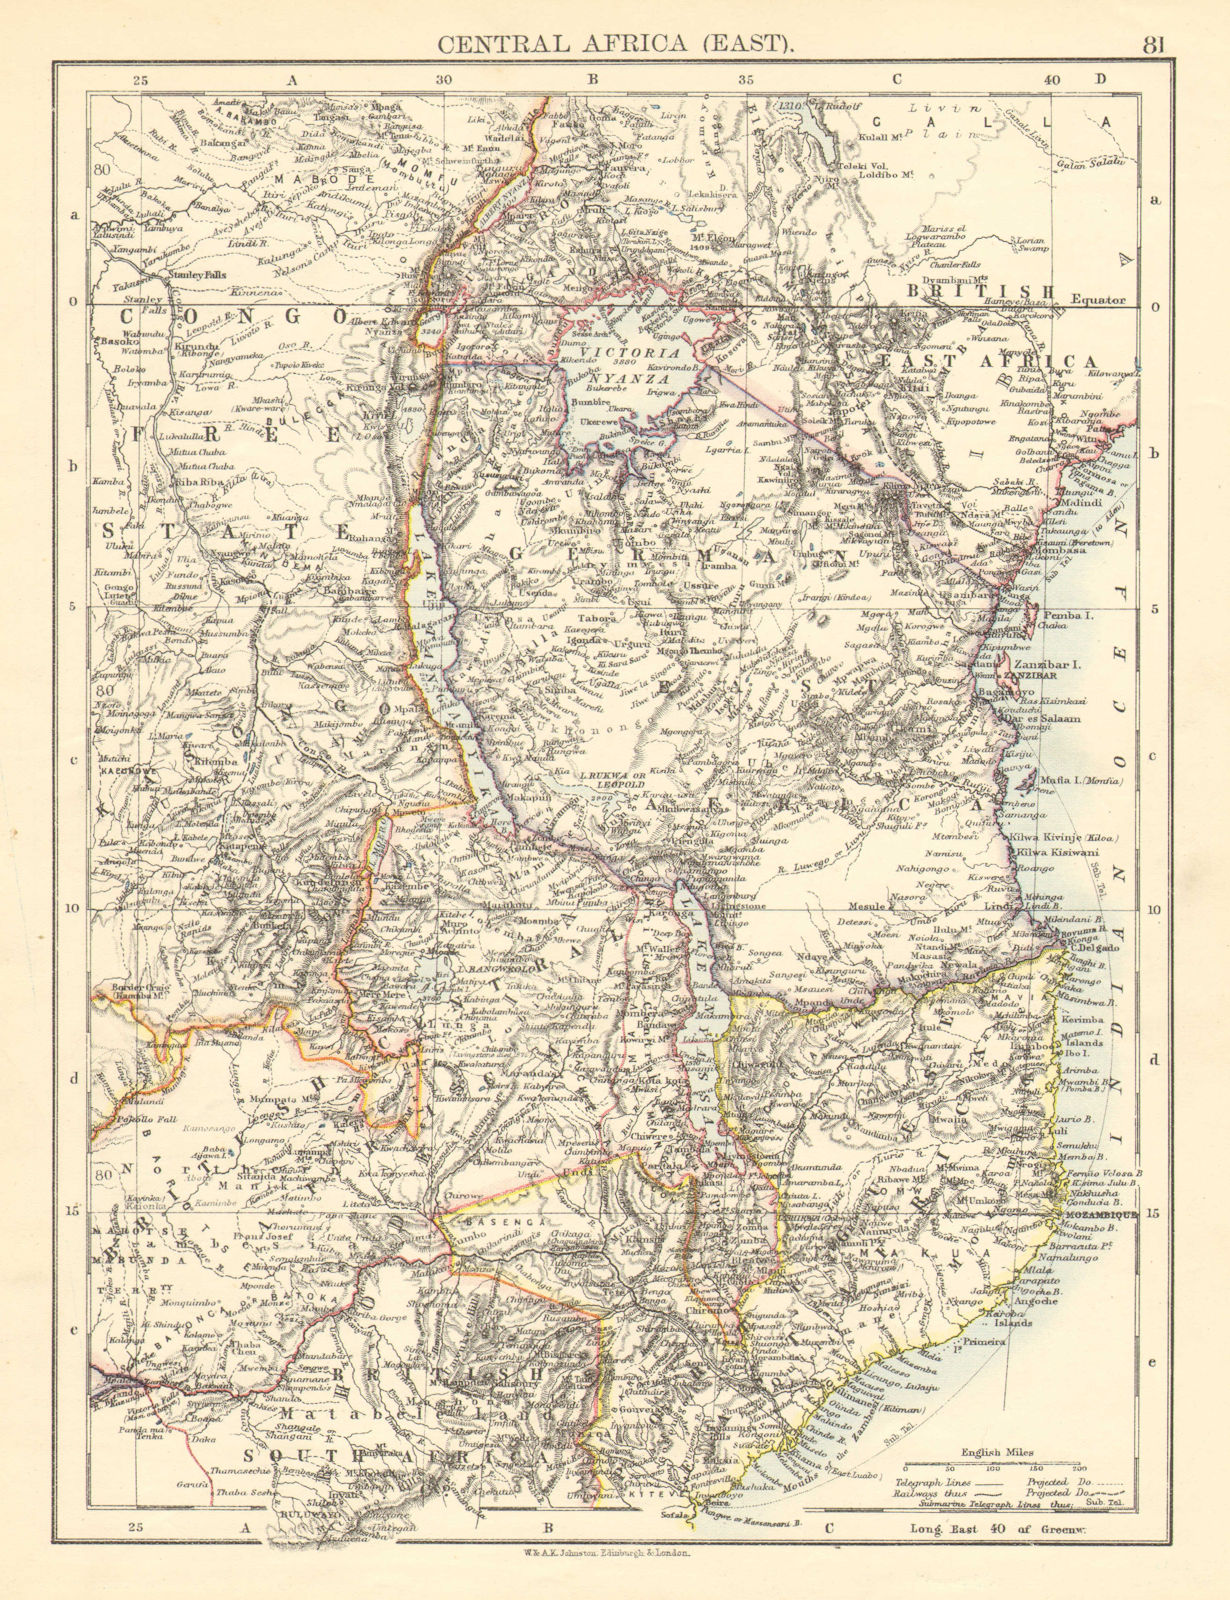 COLONIAL EAST AFRICA. German/British/Portuguese East Africa. Tanzania 1899 map